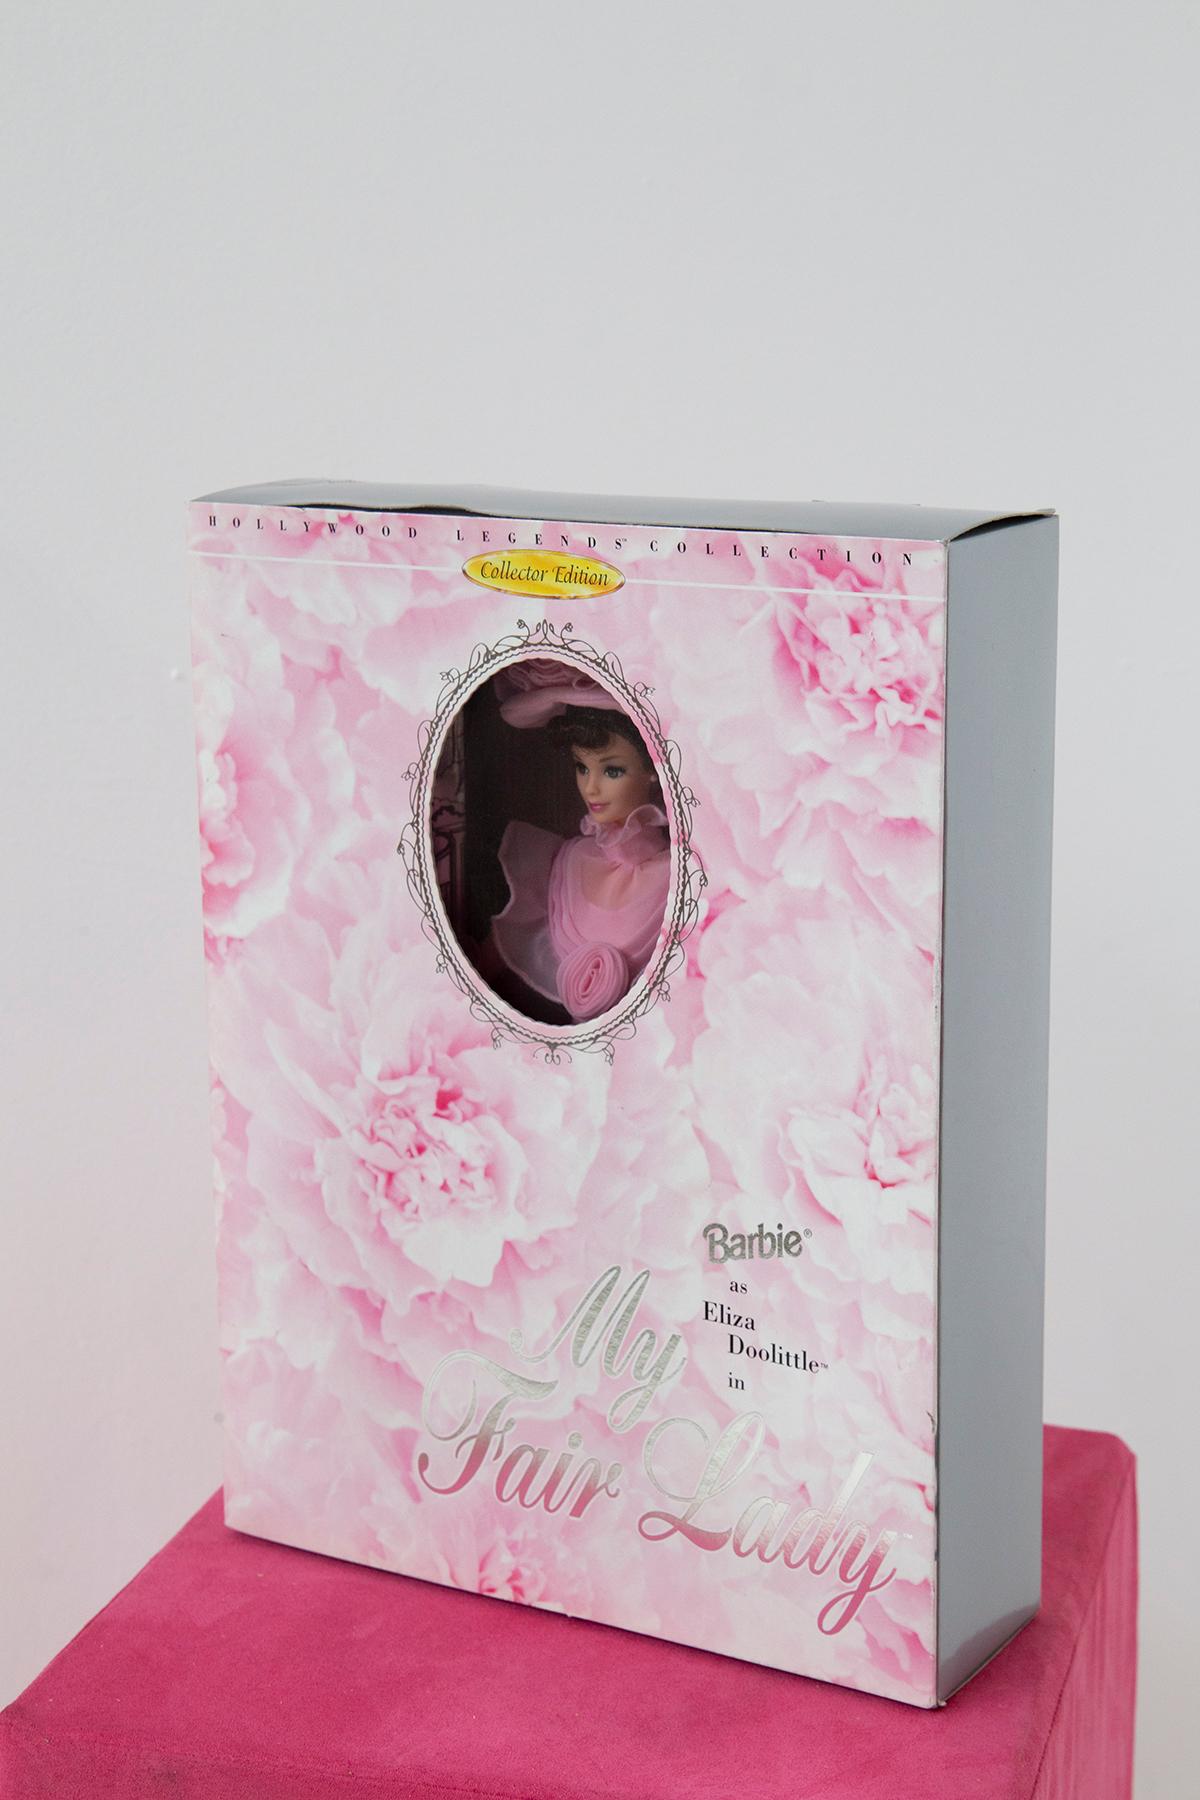 Hollywood Legends Collection Barbie as Eliza Doolittle in My Fair Lady. This is Barbie as Eliza in her pink dress once she became a lady and visits Henry Higgins' mother. As New in the Box. 
Limited edition Reproduction of the 1959 edition of